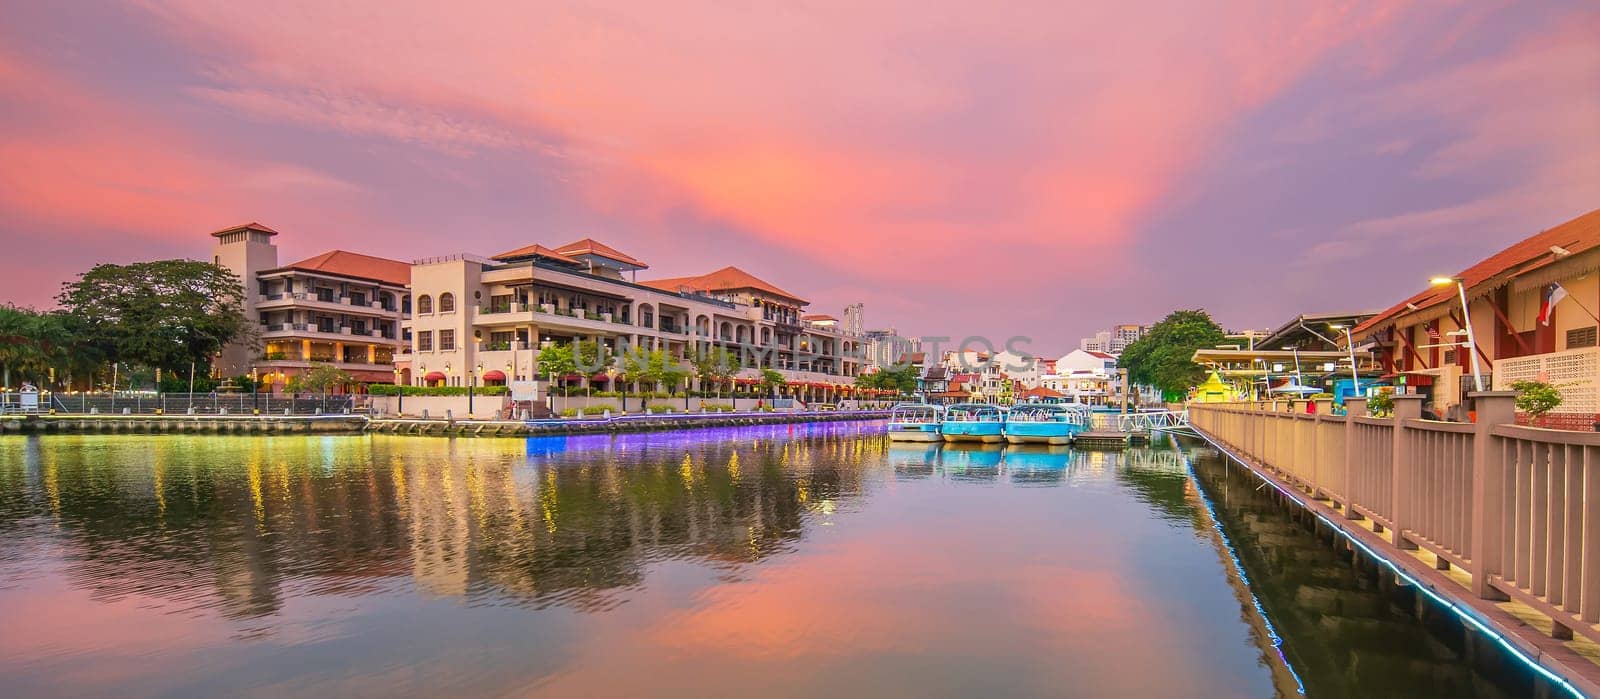 The old town of Malacca, Melaca and the Malacca river. UNESCO World Heritage Site in Malaysia at twilight